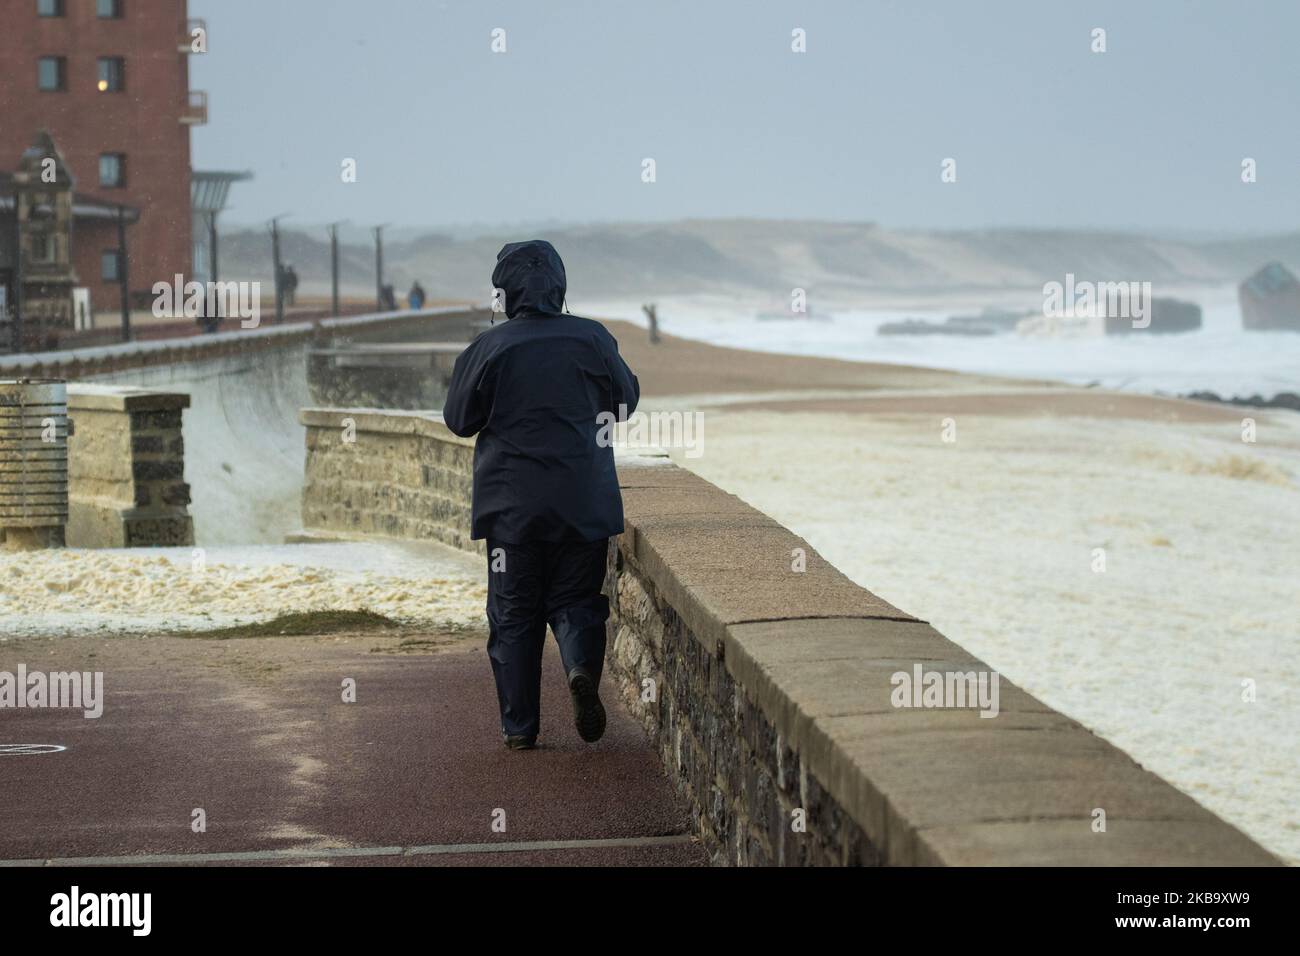 A person in Capbreton walking near the ocean on November 3, 2019 during the Amelie storm. Some 100,000 households were deprived of electricity in south western France, where the Atlantic coast was swept by storm Amelie, causing damage but no casualties, according to an initial assessment by the emergency services and the prefectures. (Photo by Jerome Gilles/NurPhoto) Stock Photo